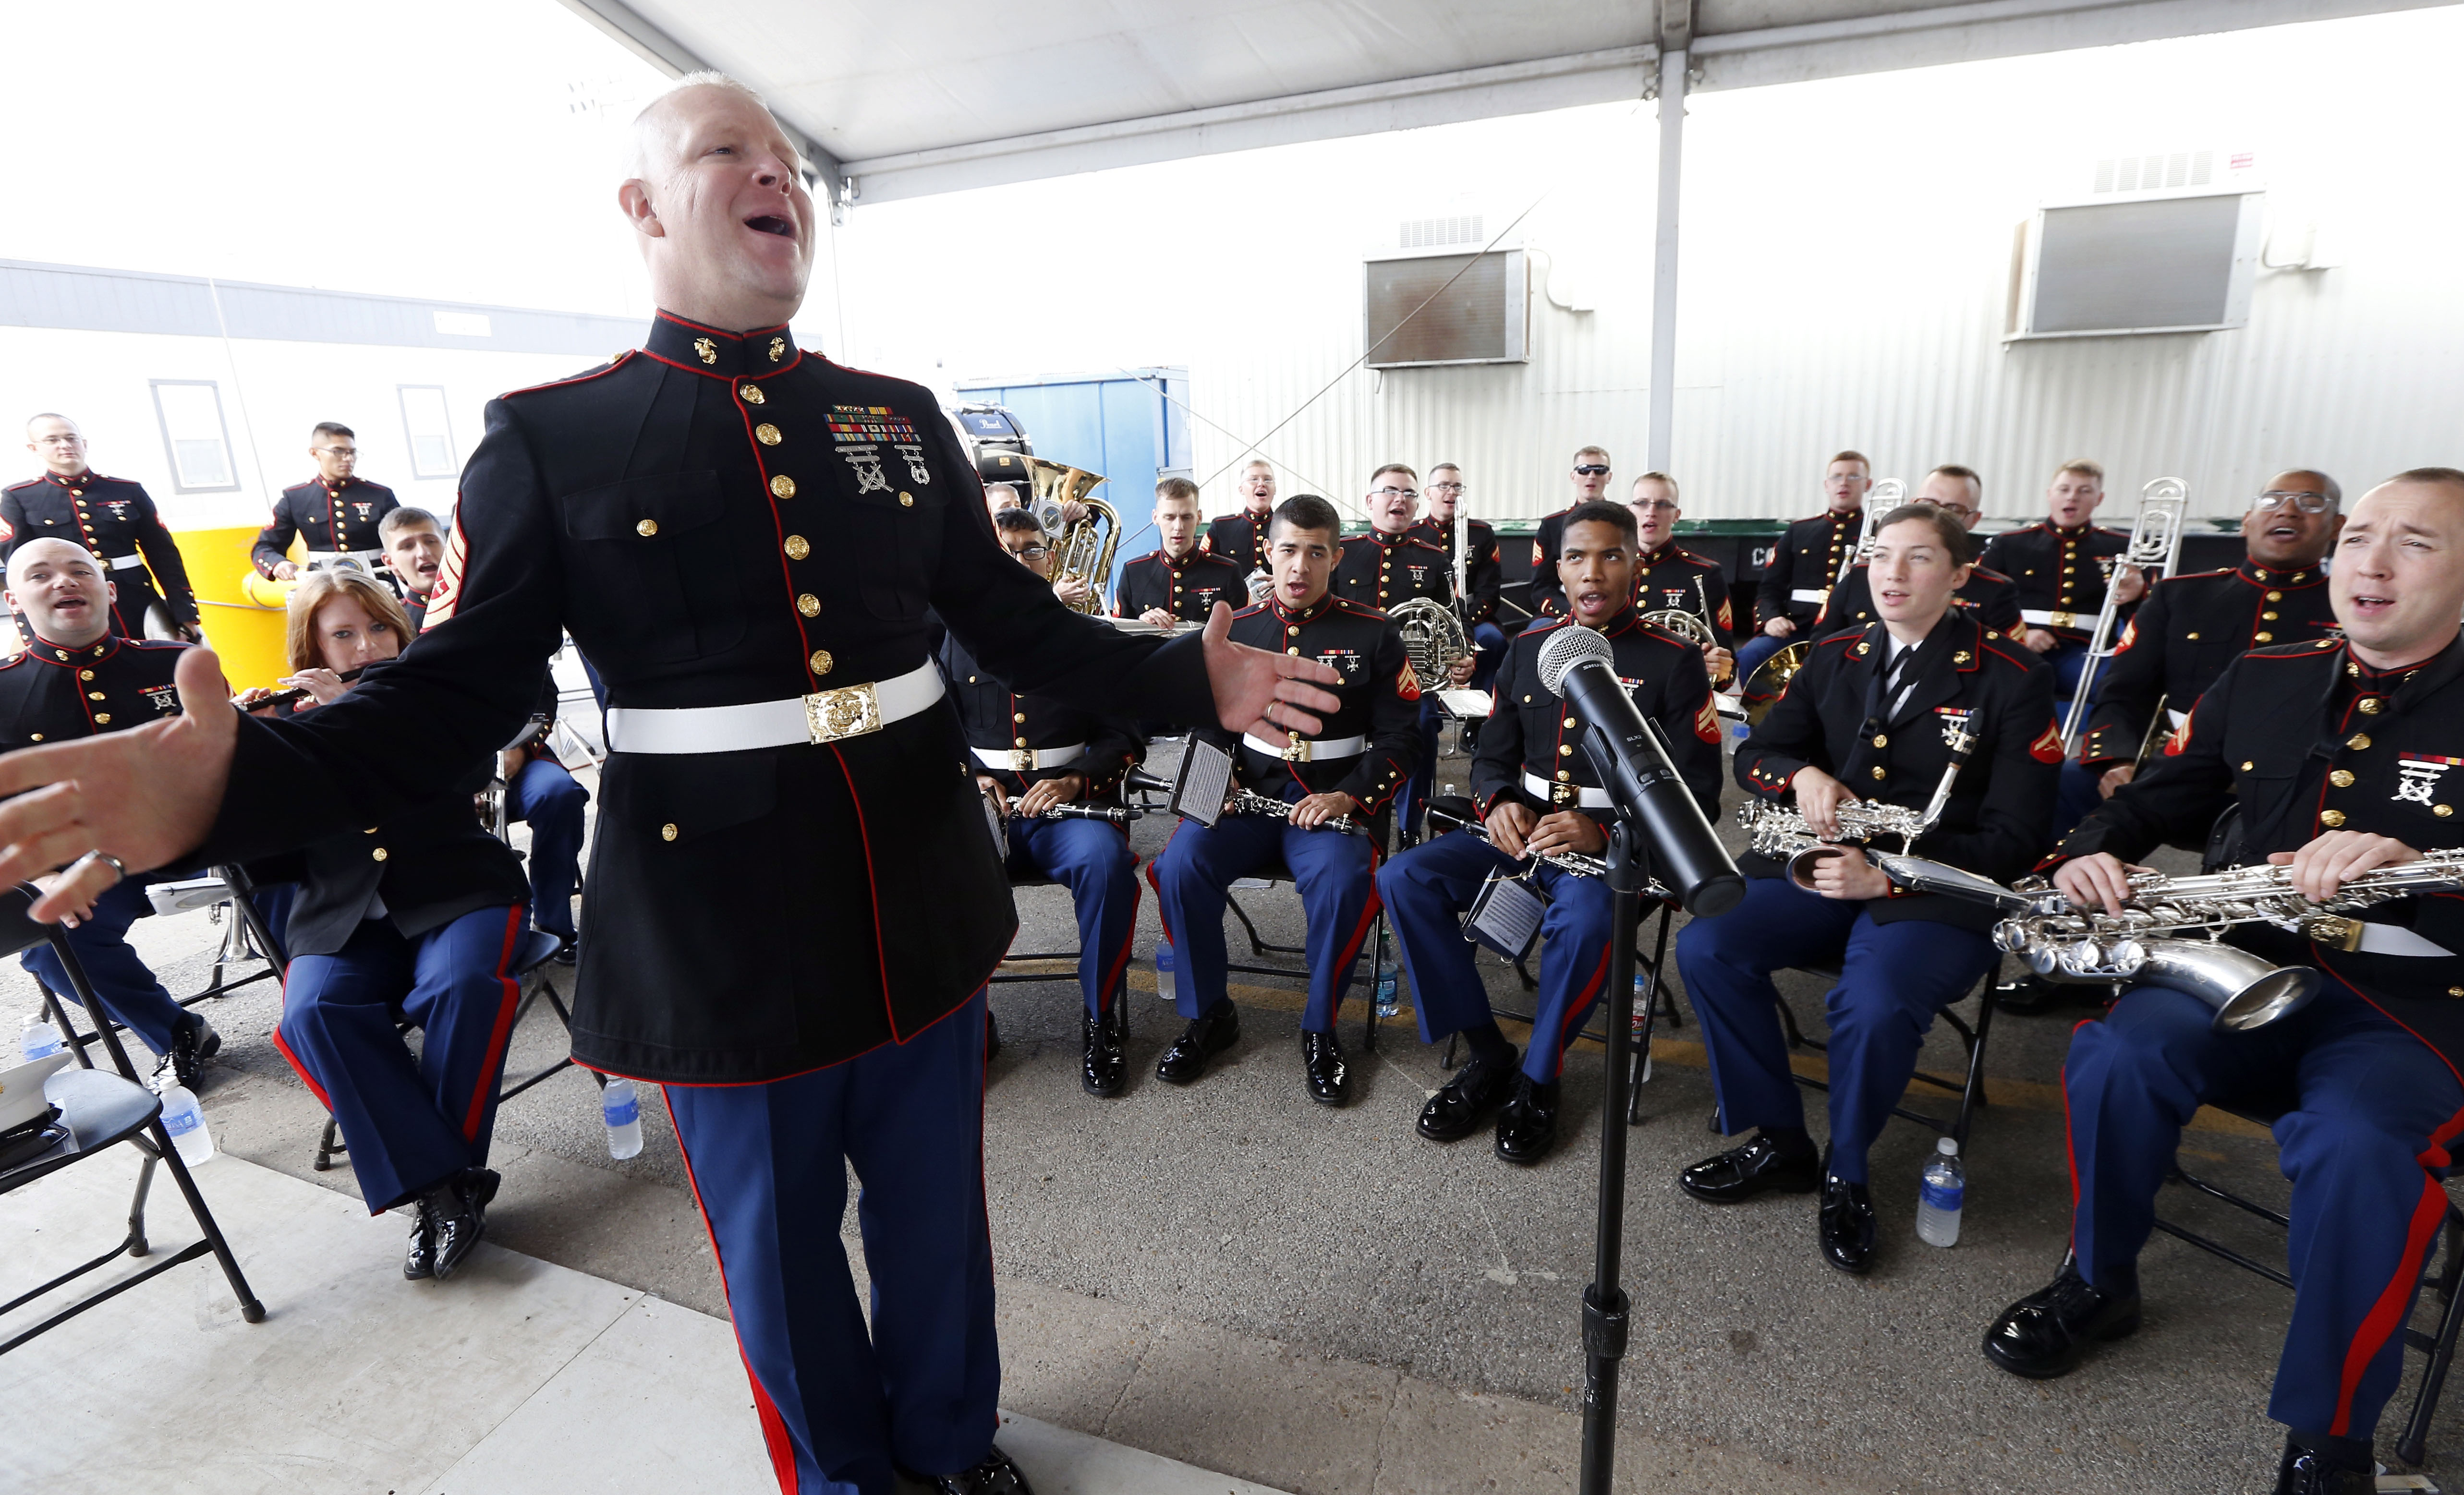 Enlisted Conductor Gunnery Sgt. Michael Maschmeier, leads the U.S. Marine Corps Band from New Orleans in singing prior to the christening  amphibious transport dock, the John P. Murtha  in 2015. (AP Photo/Rogelio V. Solis)